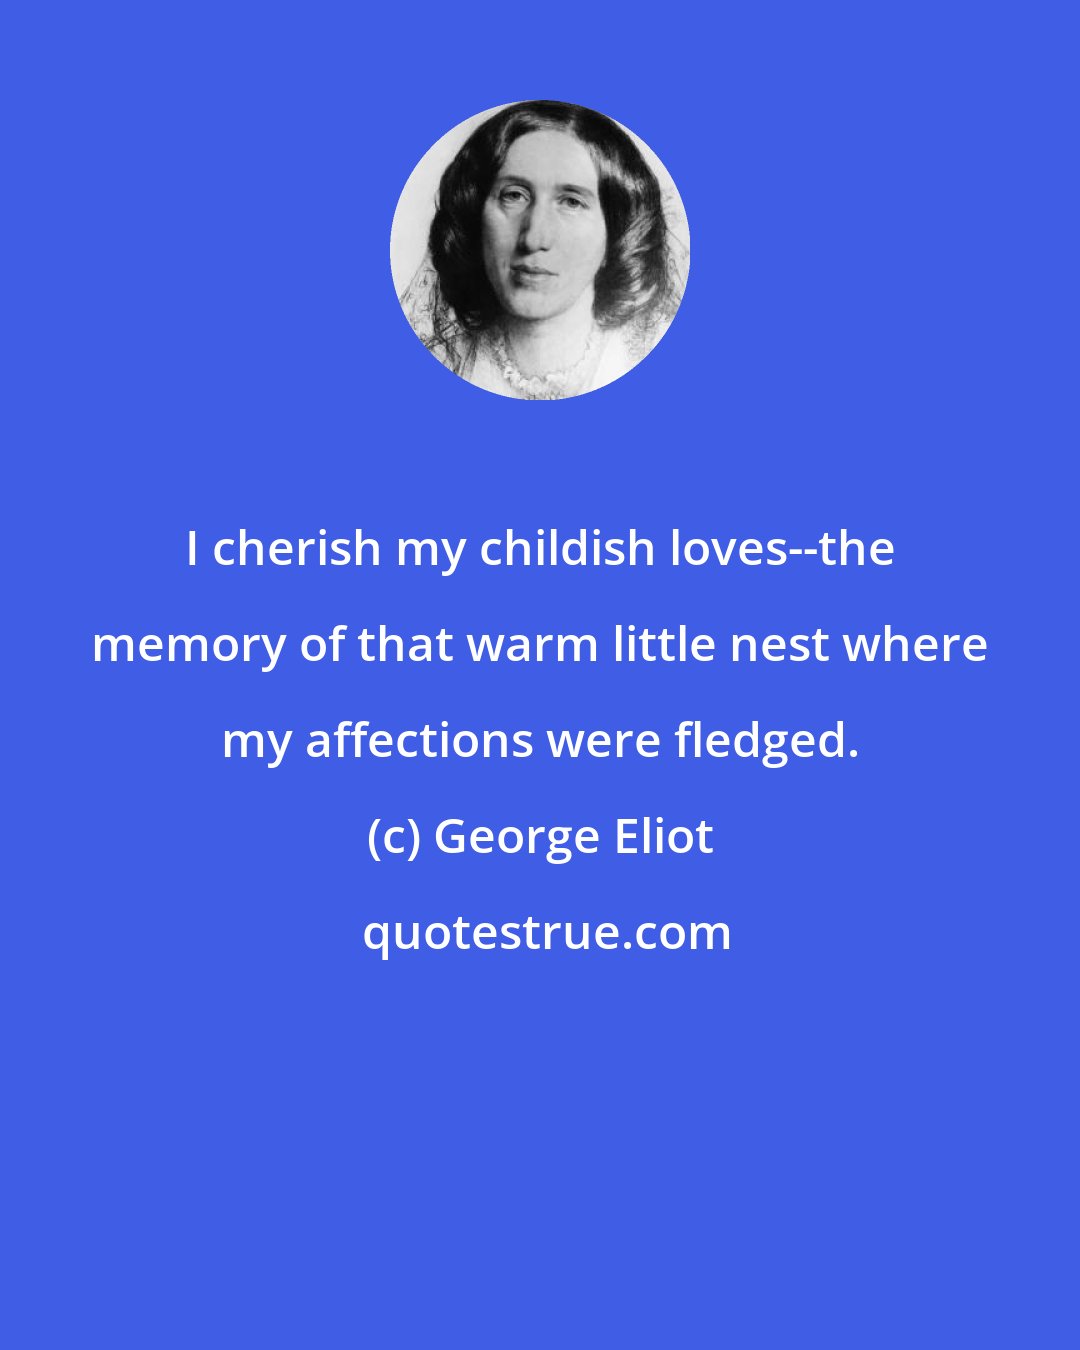 George Eliot: I cherish my childish loves--the memory of that warm little nest where my affections were fledged.